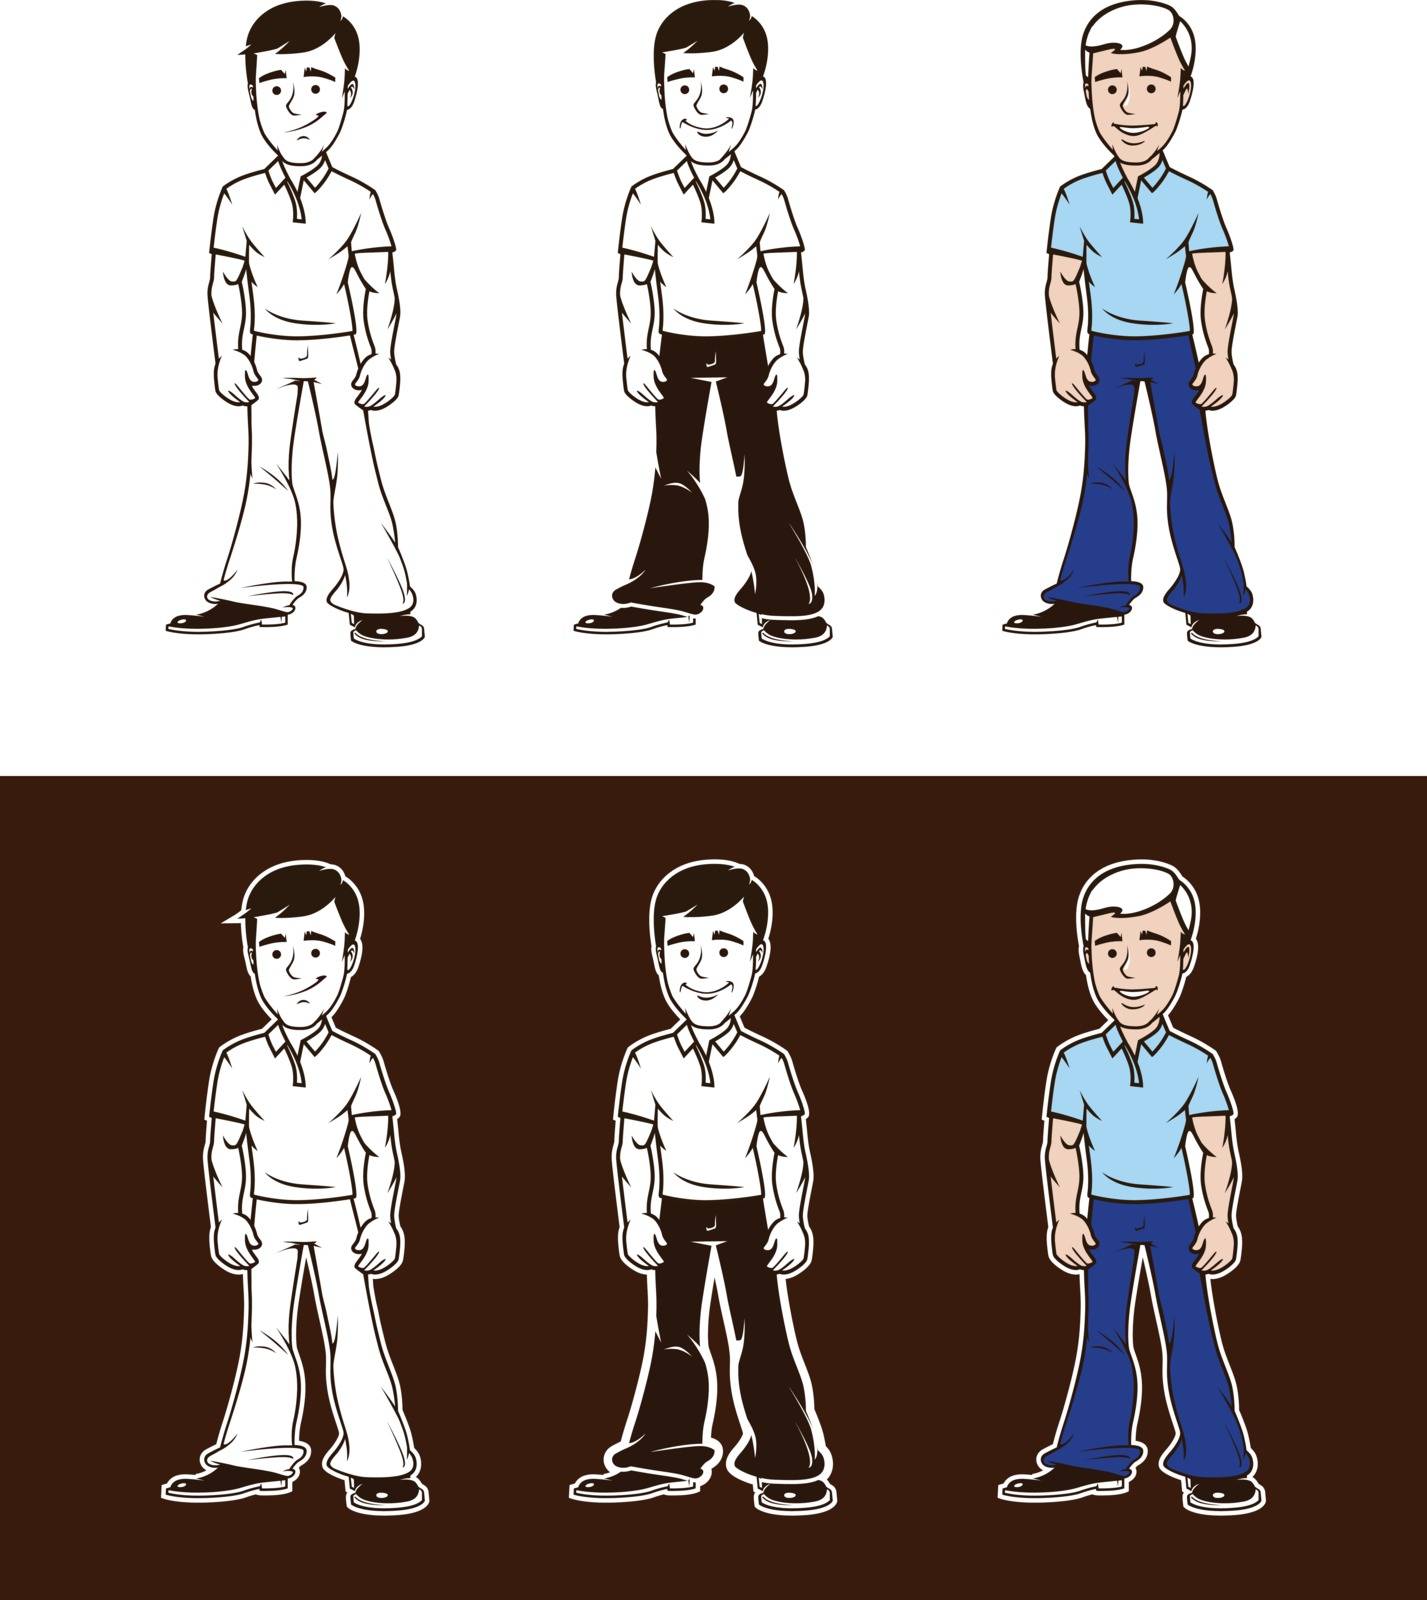 Set of man characters, eps10 vector format